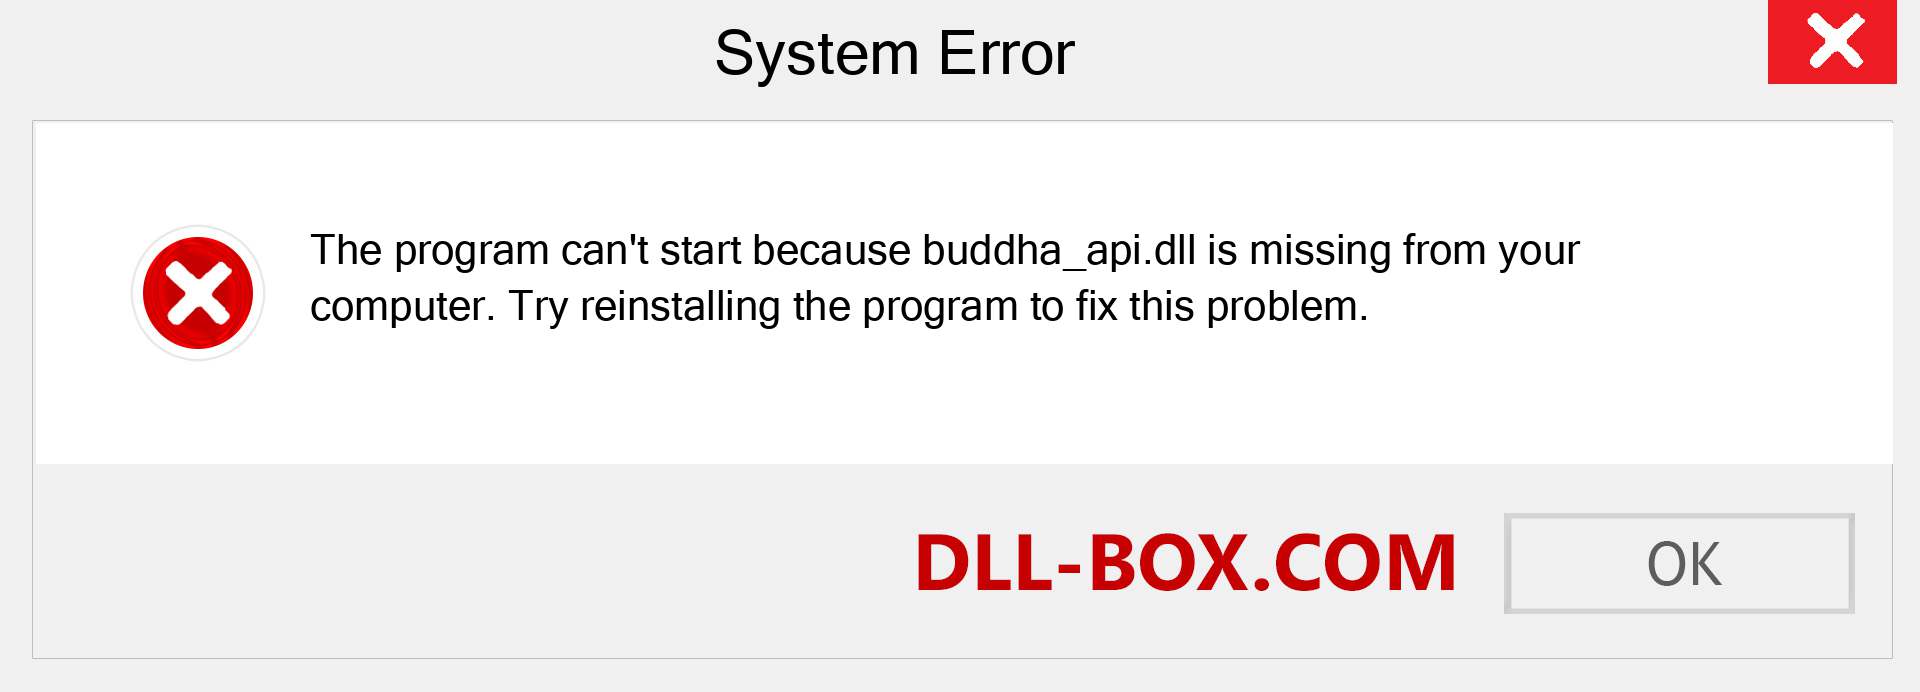  buddha_api.dll file is missing?. Download for Windows 7, 8, 10 - Fix  buddha_api dll Missing Error on Windows, photos, images